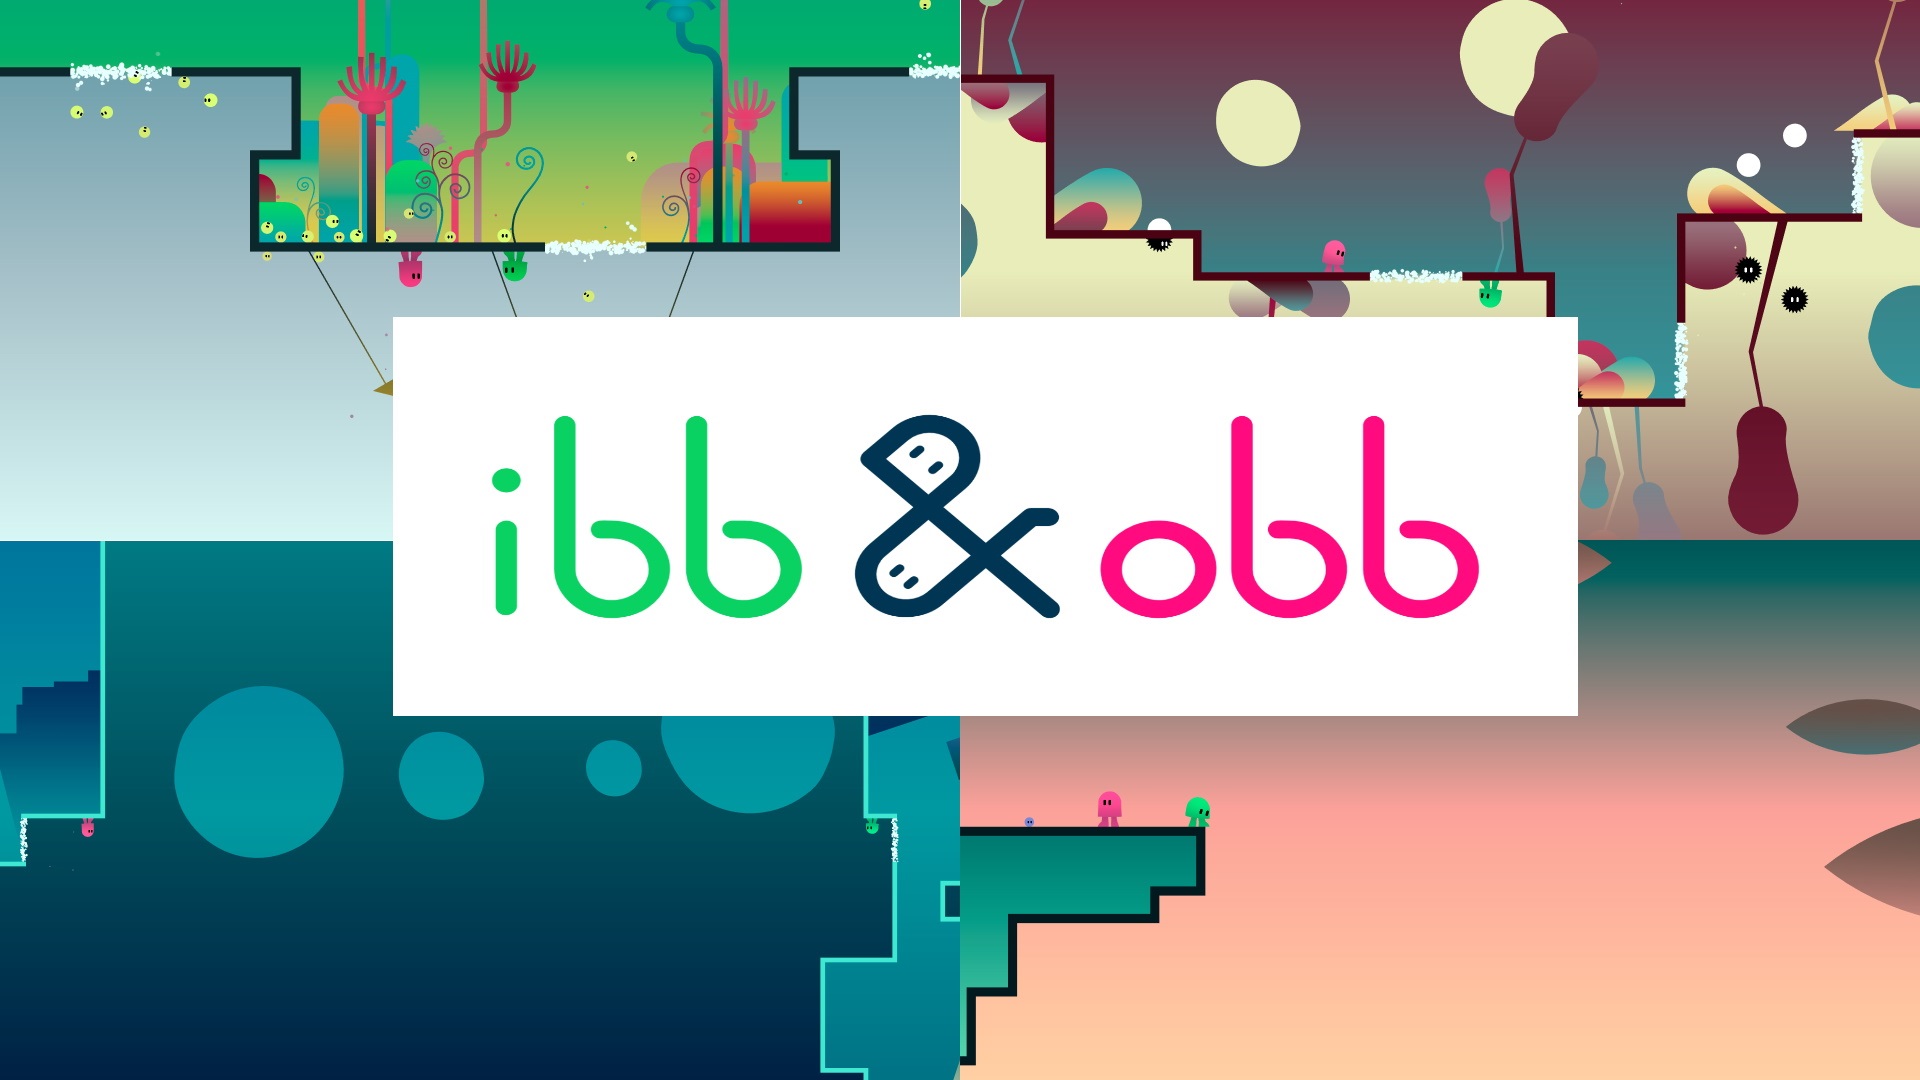 adventure ibb & obb out now on the Nintendo Switch! - BunnyGaming.com